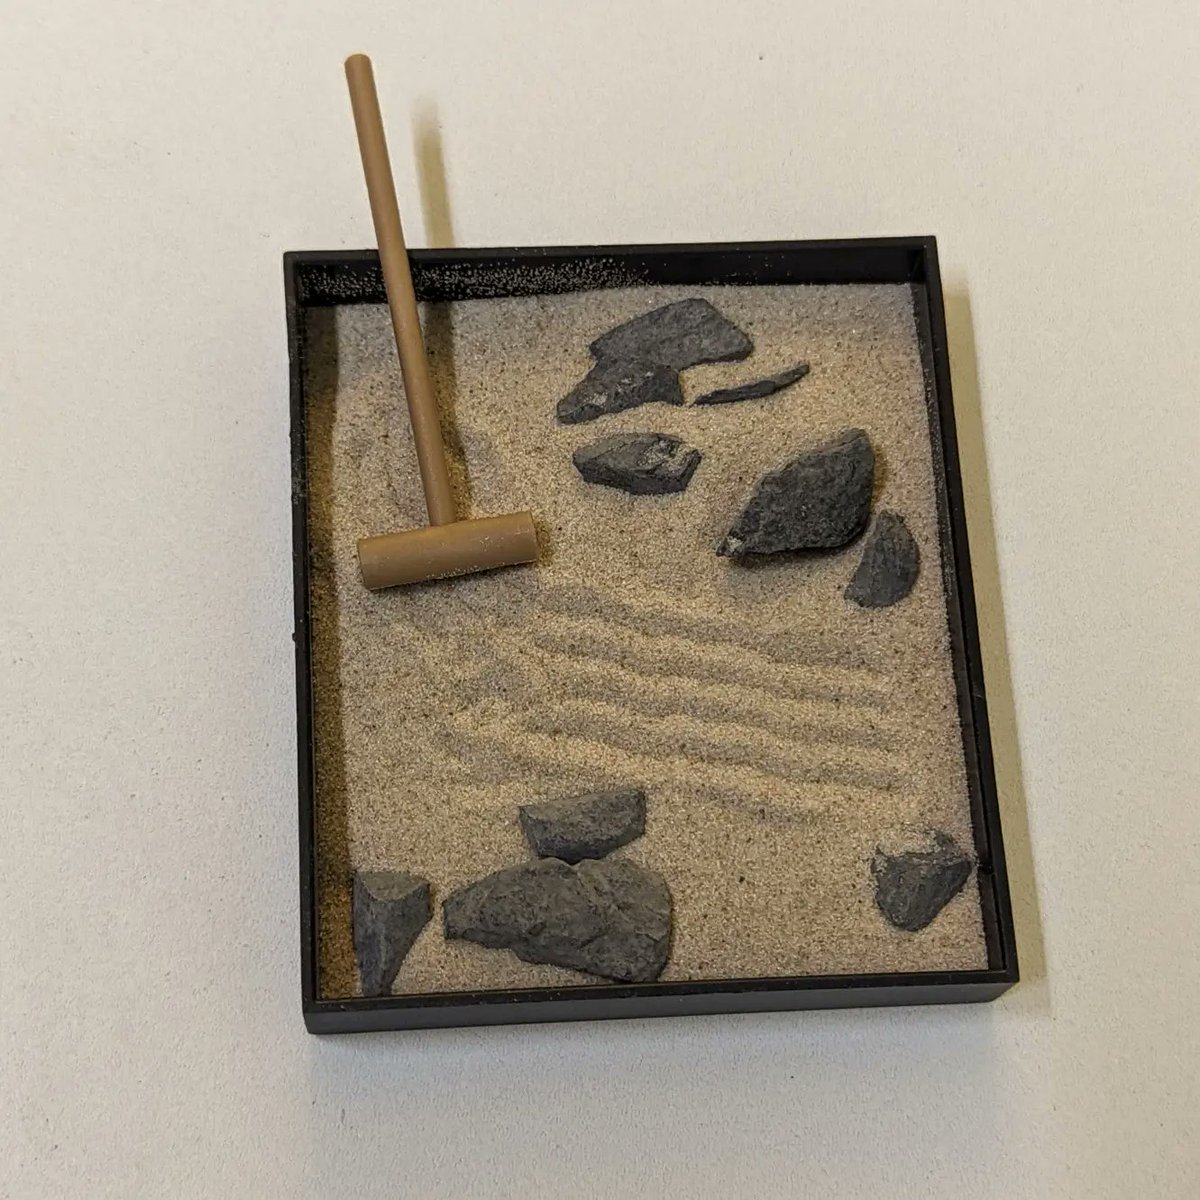 The newest addition to my office - a mini zen garden kit from @dollartree 🙃 (It fits in the palm of your hands!)

#SchoolCounselor #SchoolCounseling #DIY #DollarTree #mentalhealth #socialemotionallearning #elementary #school #education #budgetfriendly